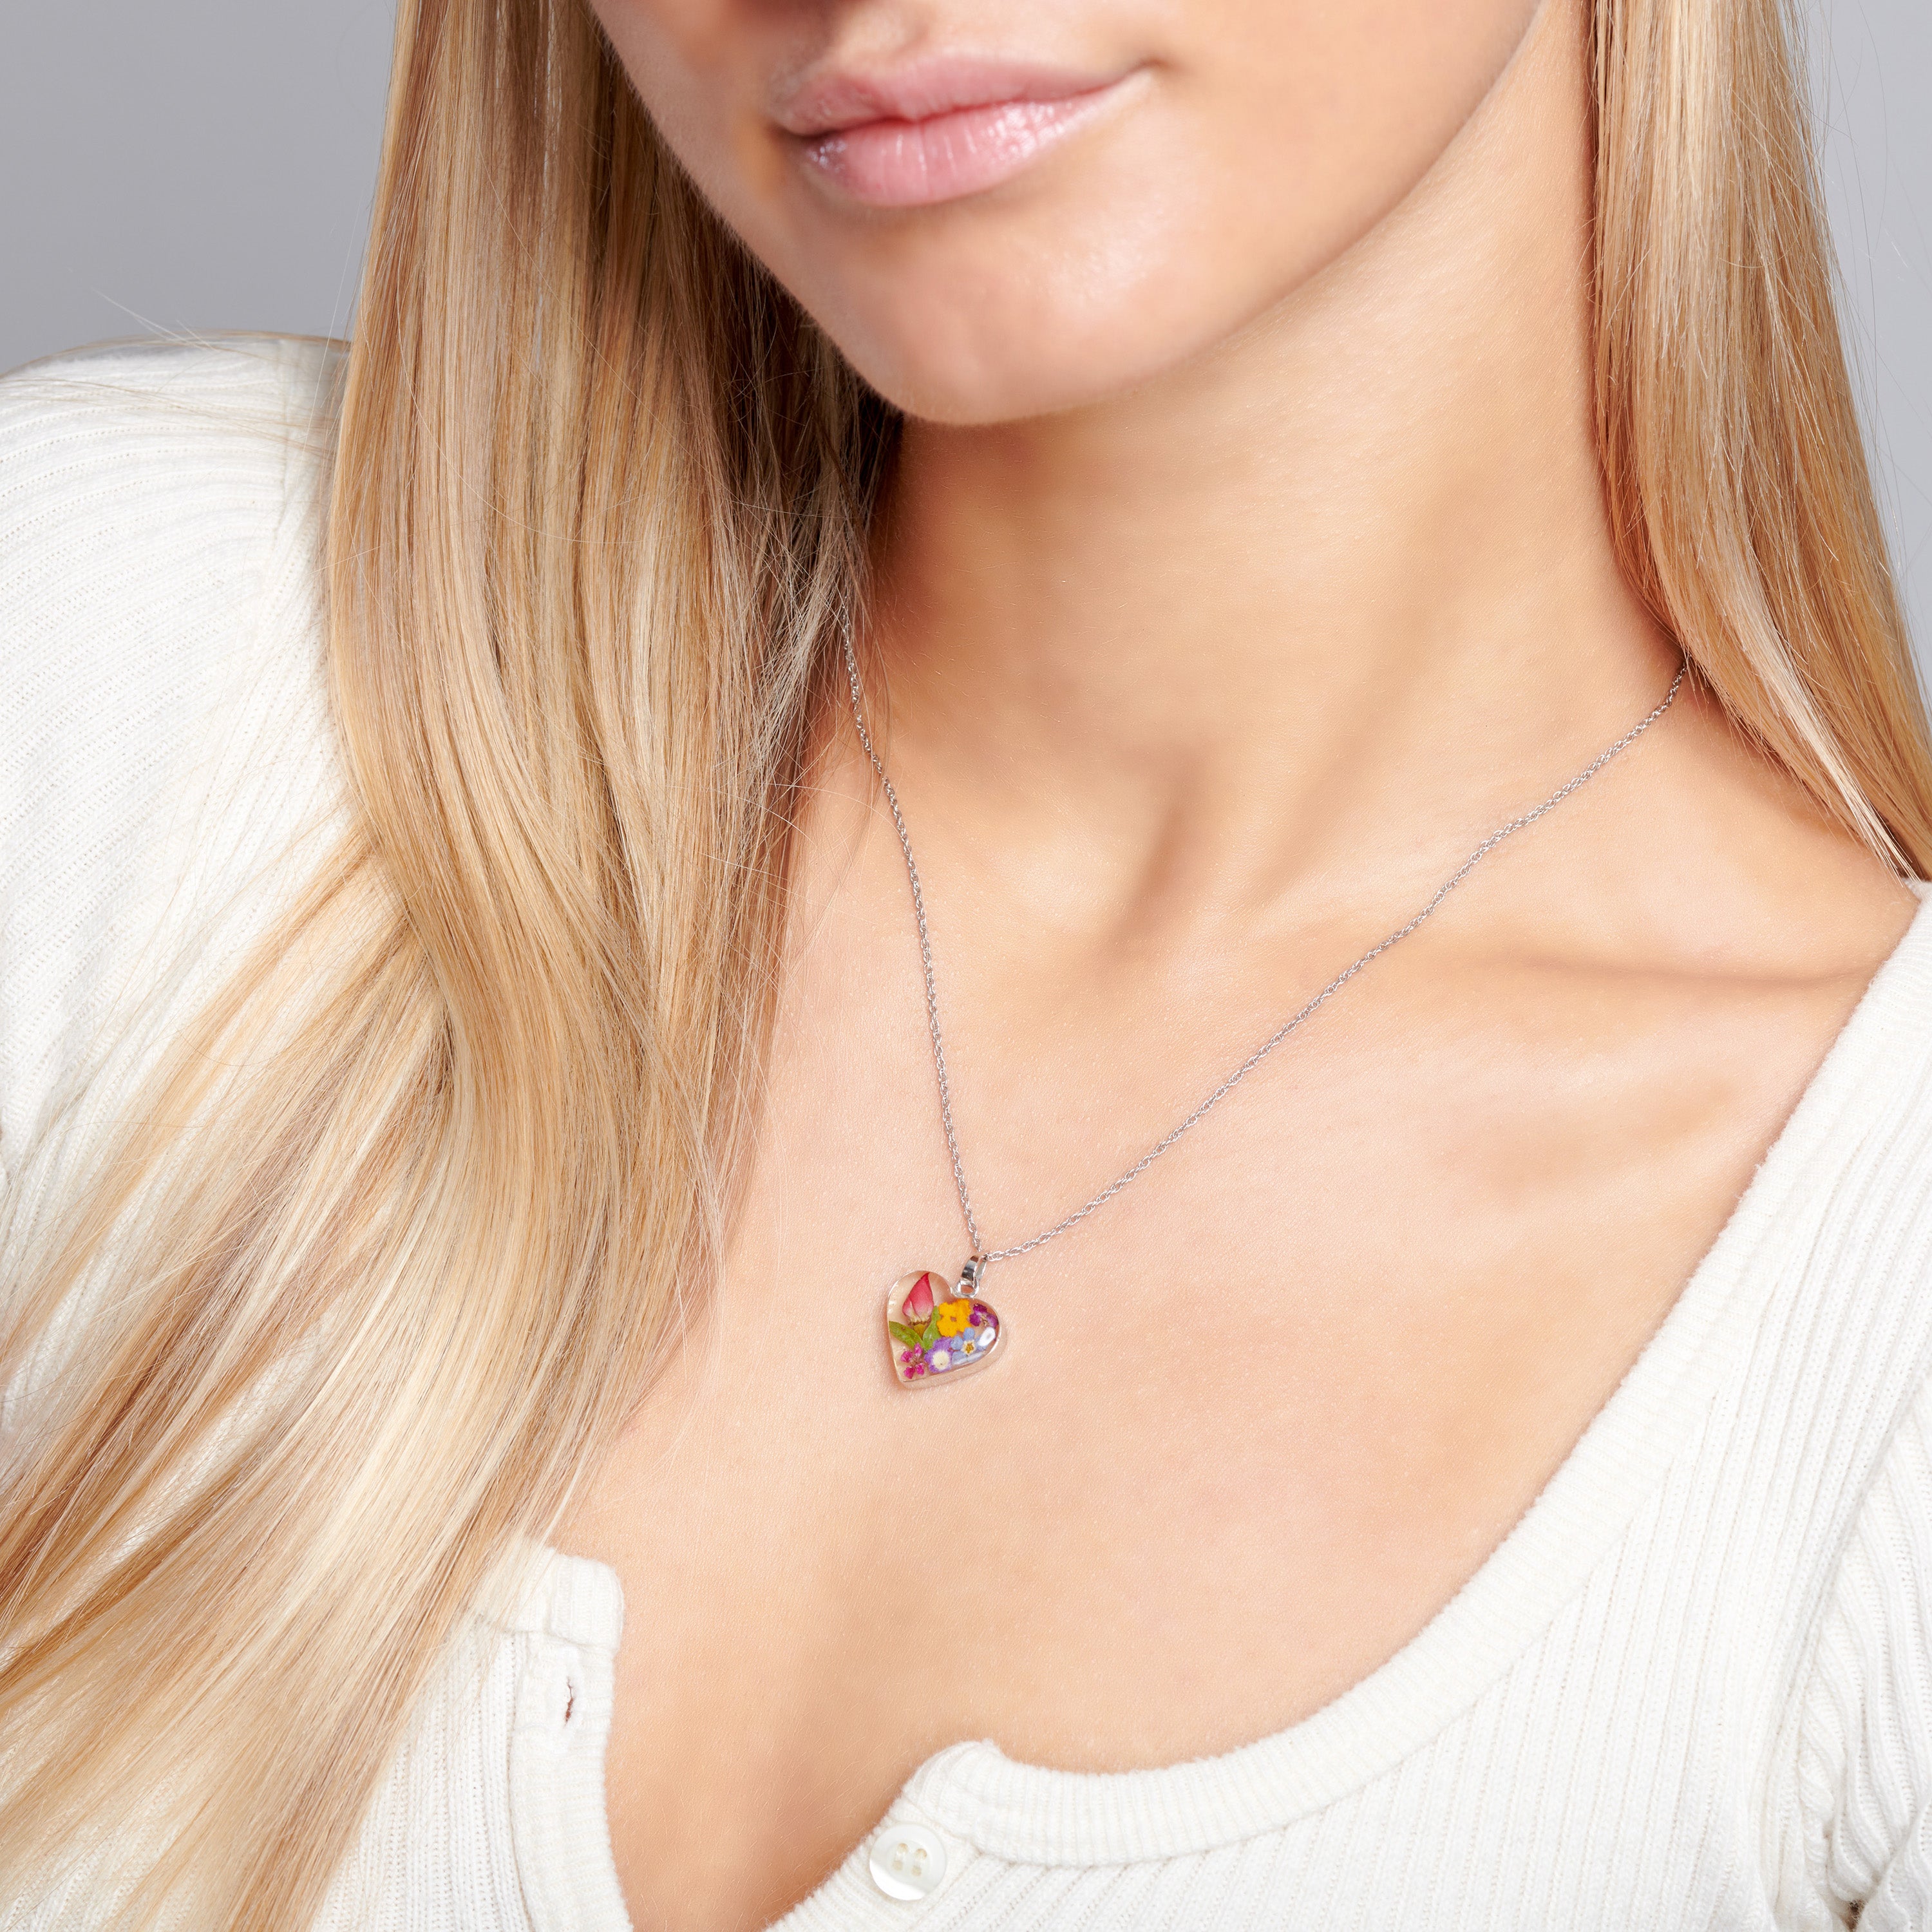 Alma Heart Necklace with Multi Colored Flowers